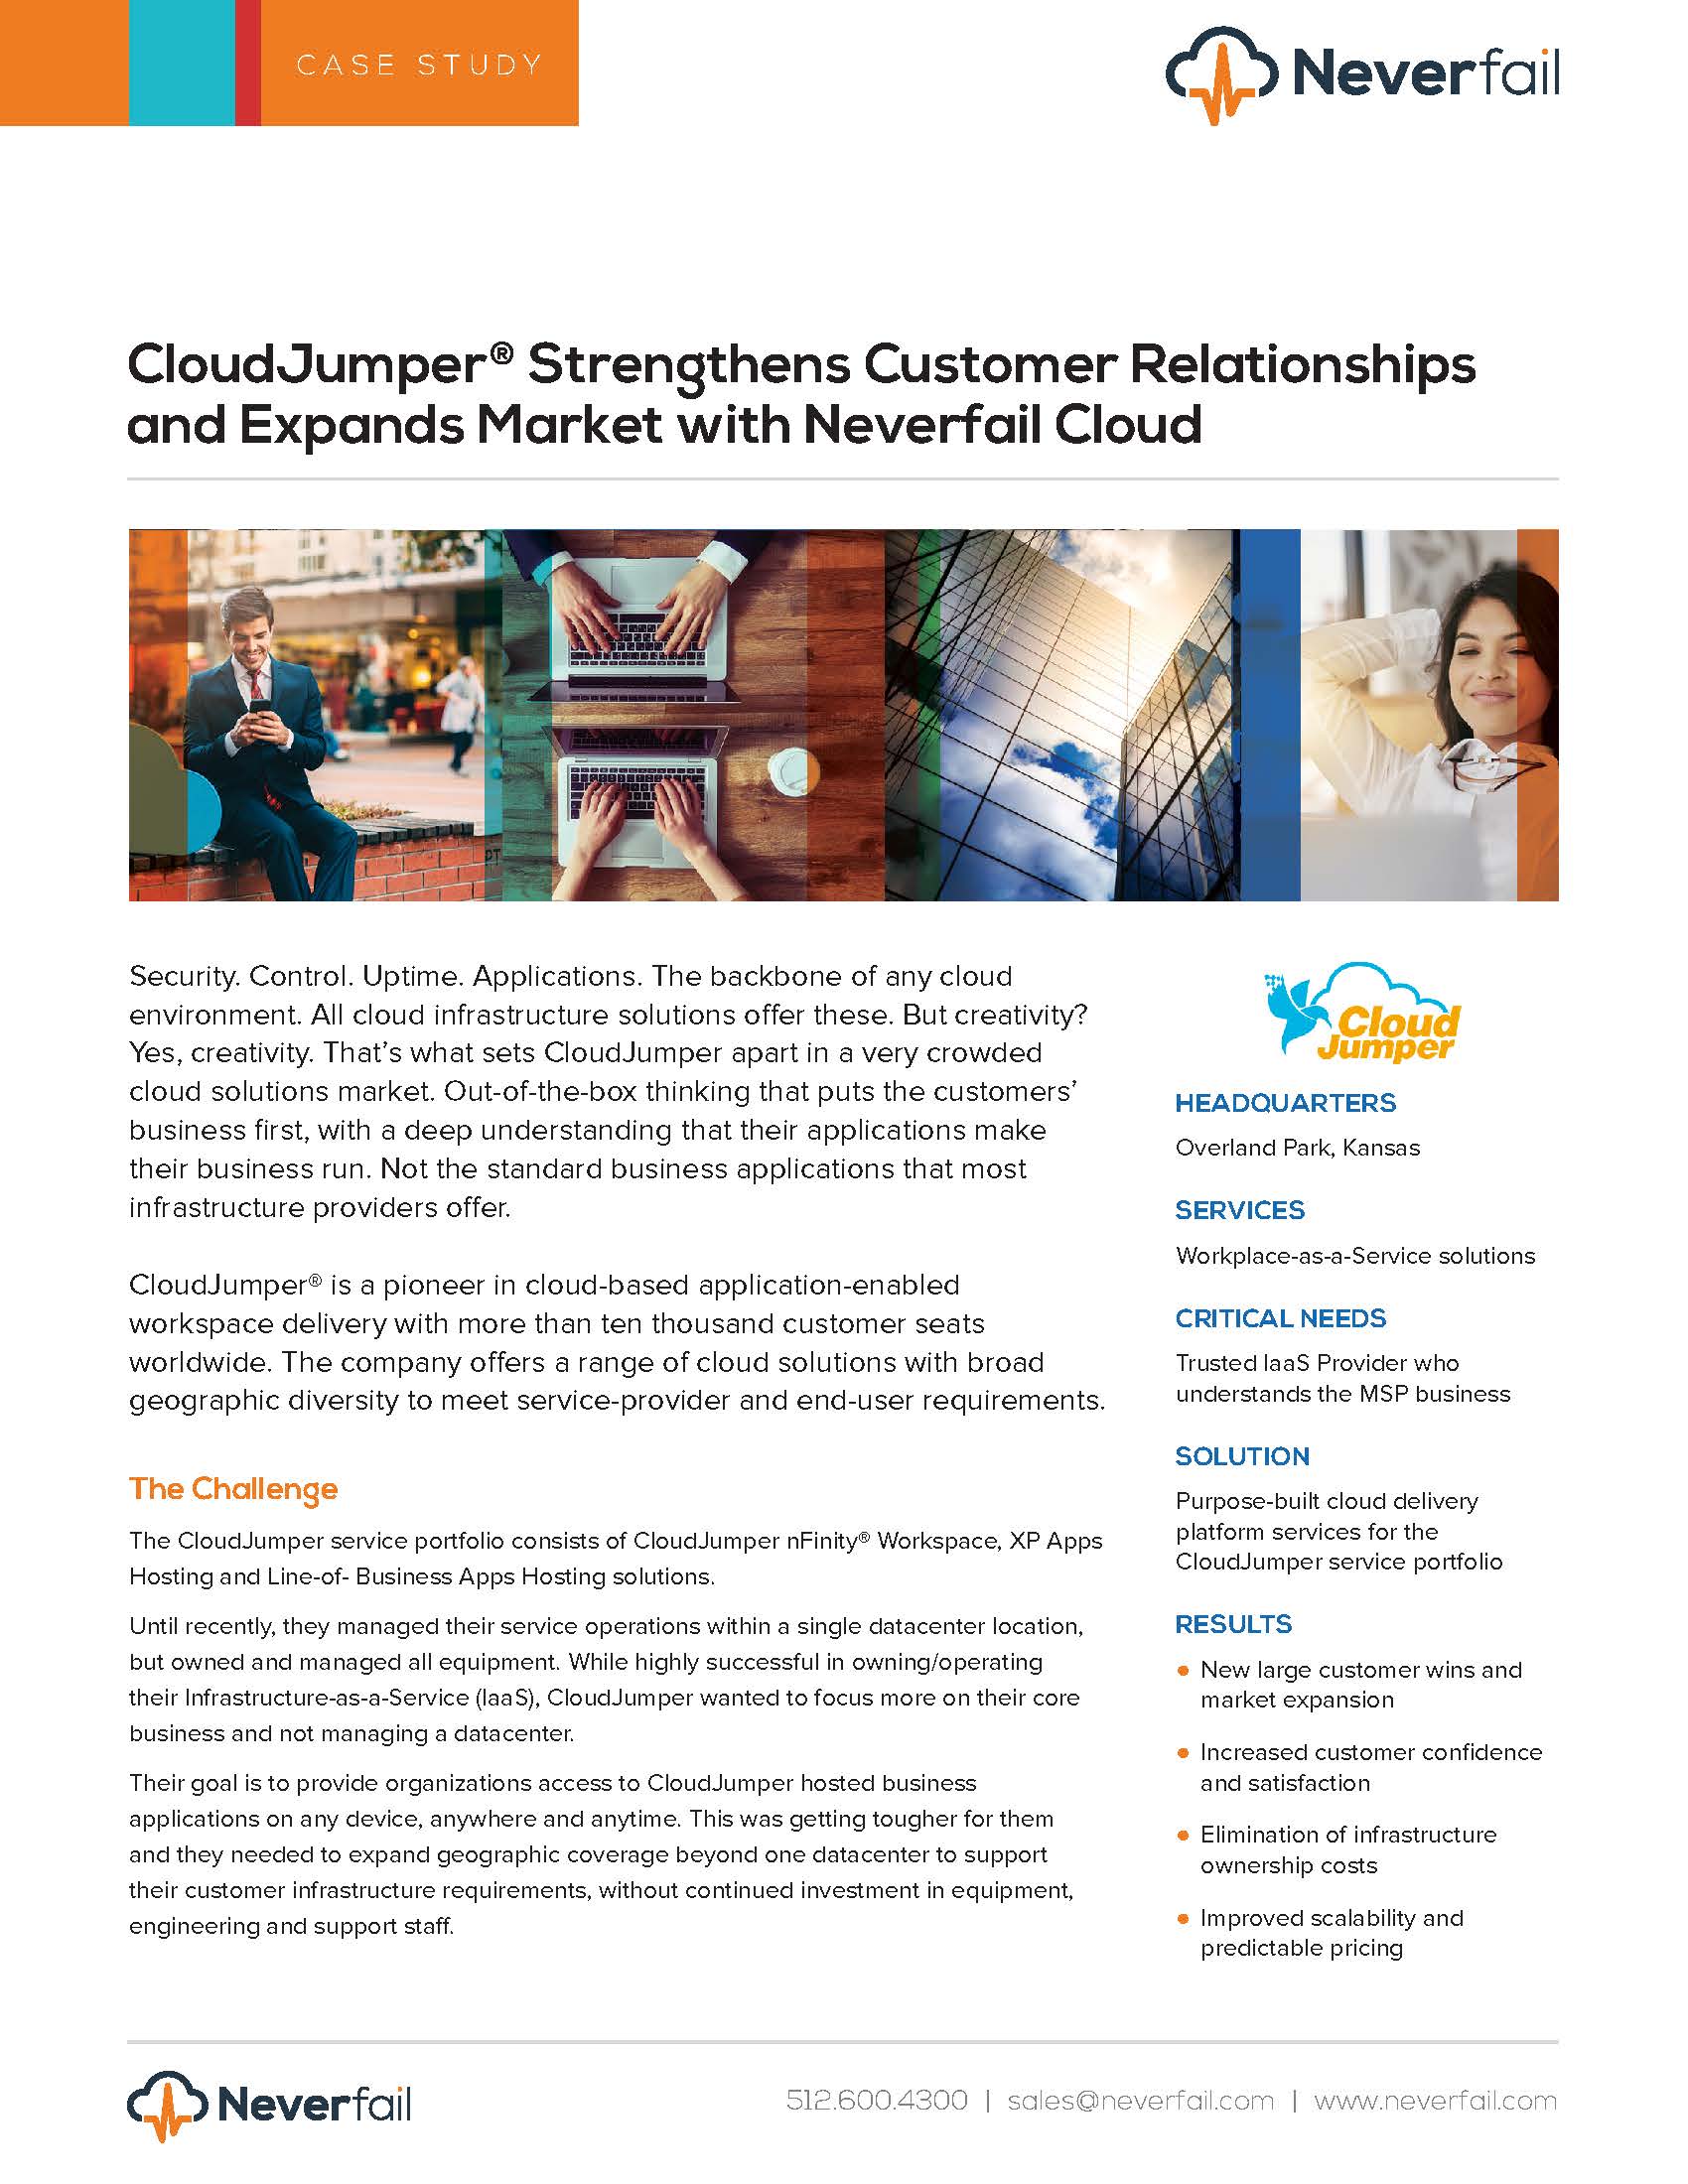 Case Study: CloudJumper uses Neverfail Cloud hosting services